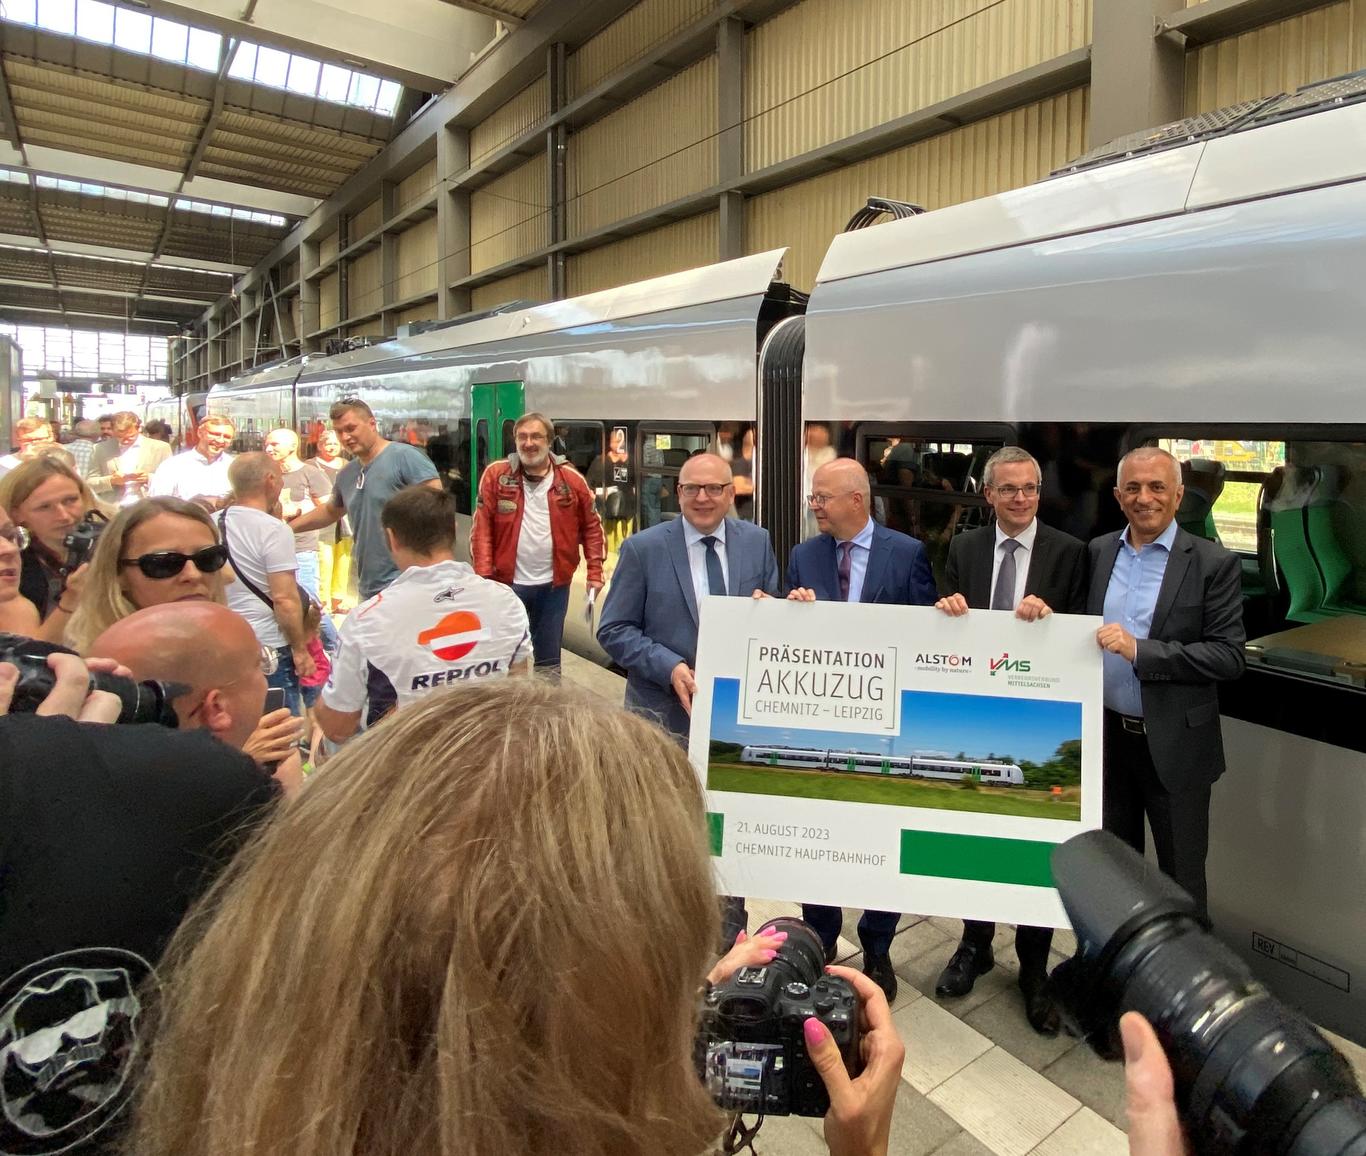 Alstom presents its new battery train in Germany